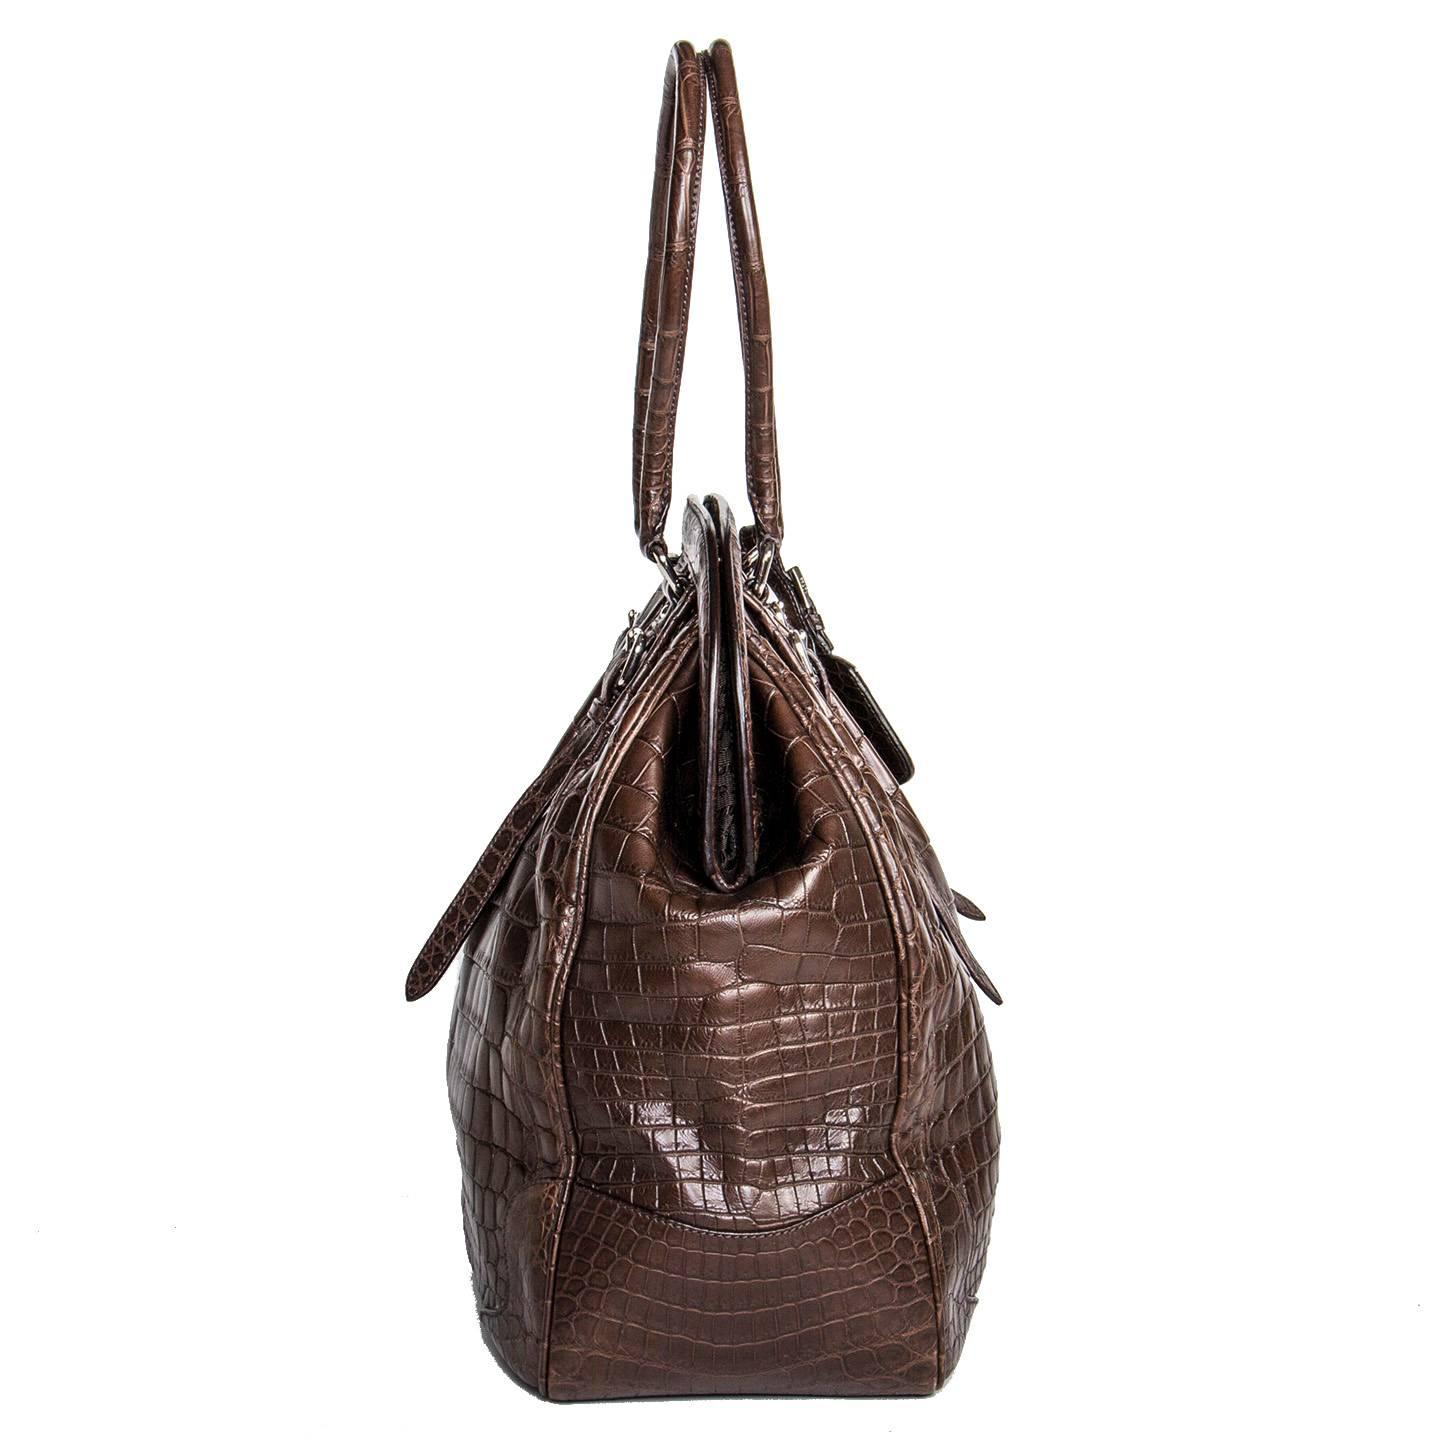 Chocolate brown crocodile bag with a vintage classic design, style reference number BR 3511. Front and back are enriched by extra straps with little belt buckles and pleats that emphasize the round volume of the bag. The front of the bag is also